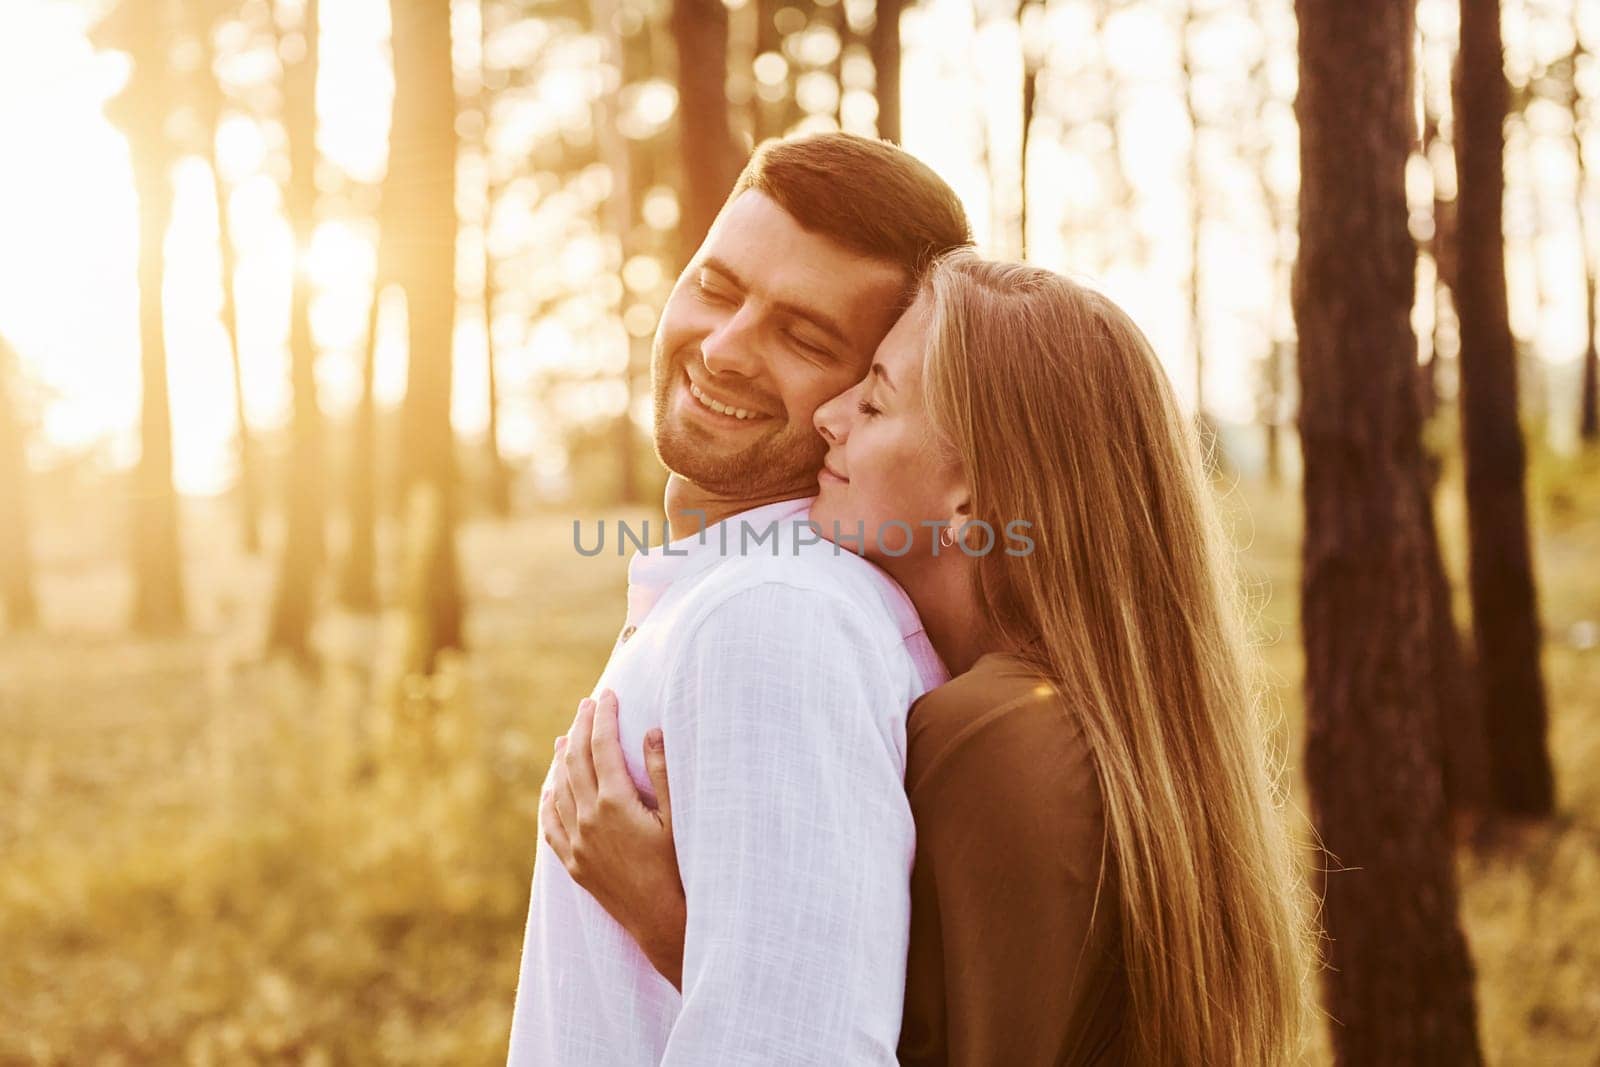 Illuminated by sunlight. Happy couple is outdoors in the forest at daytime by Standret